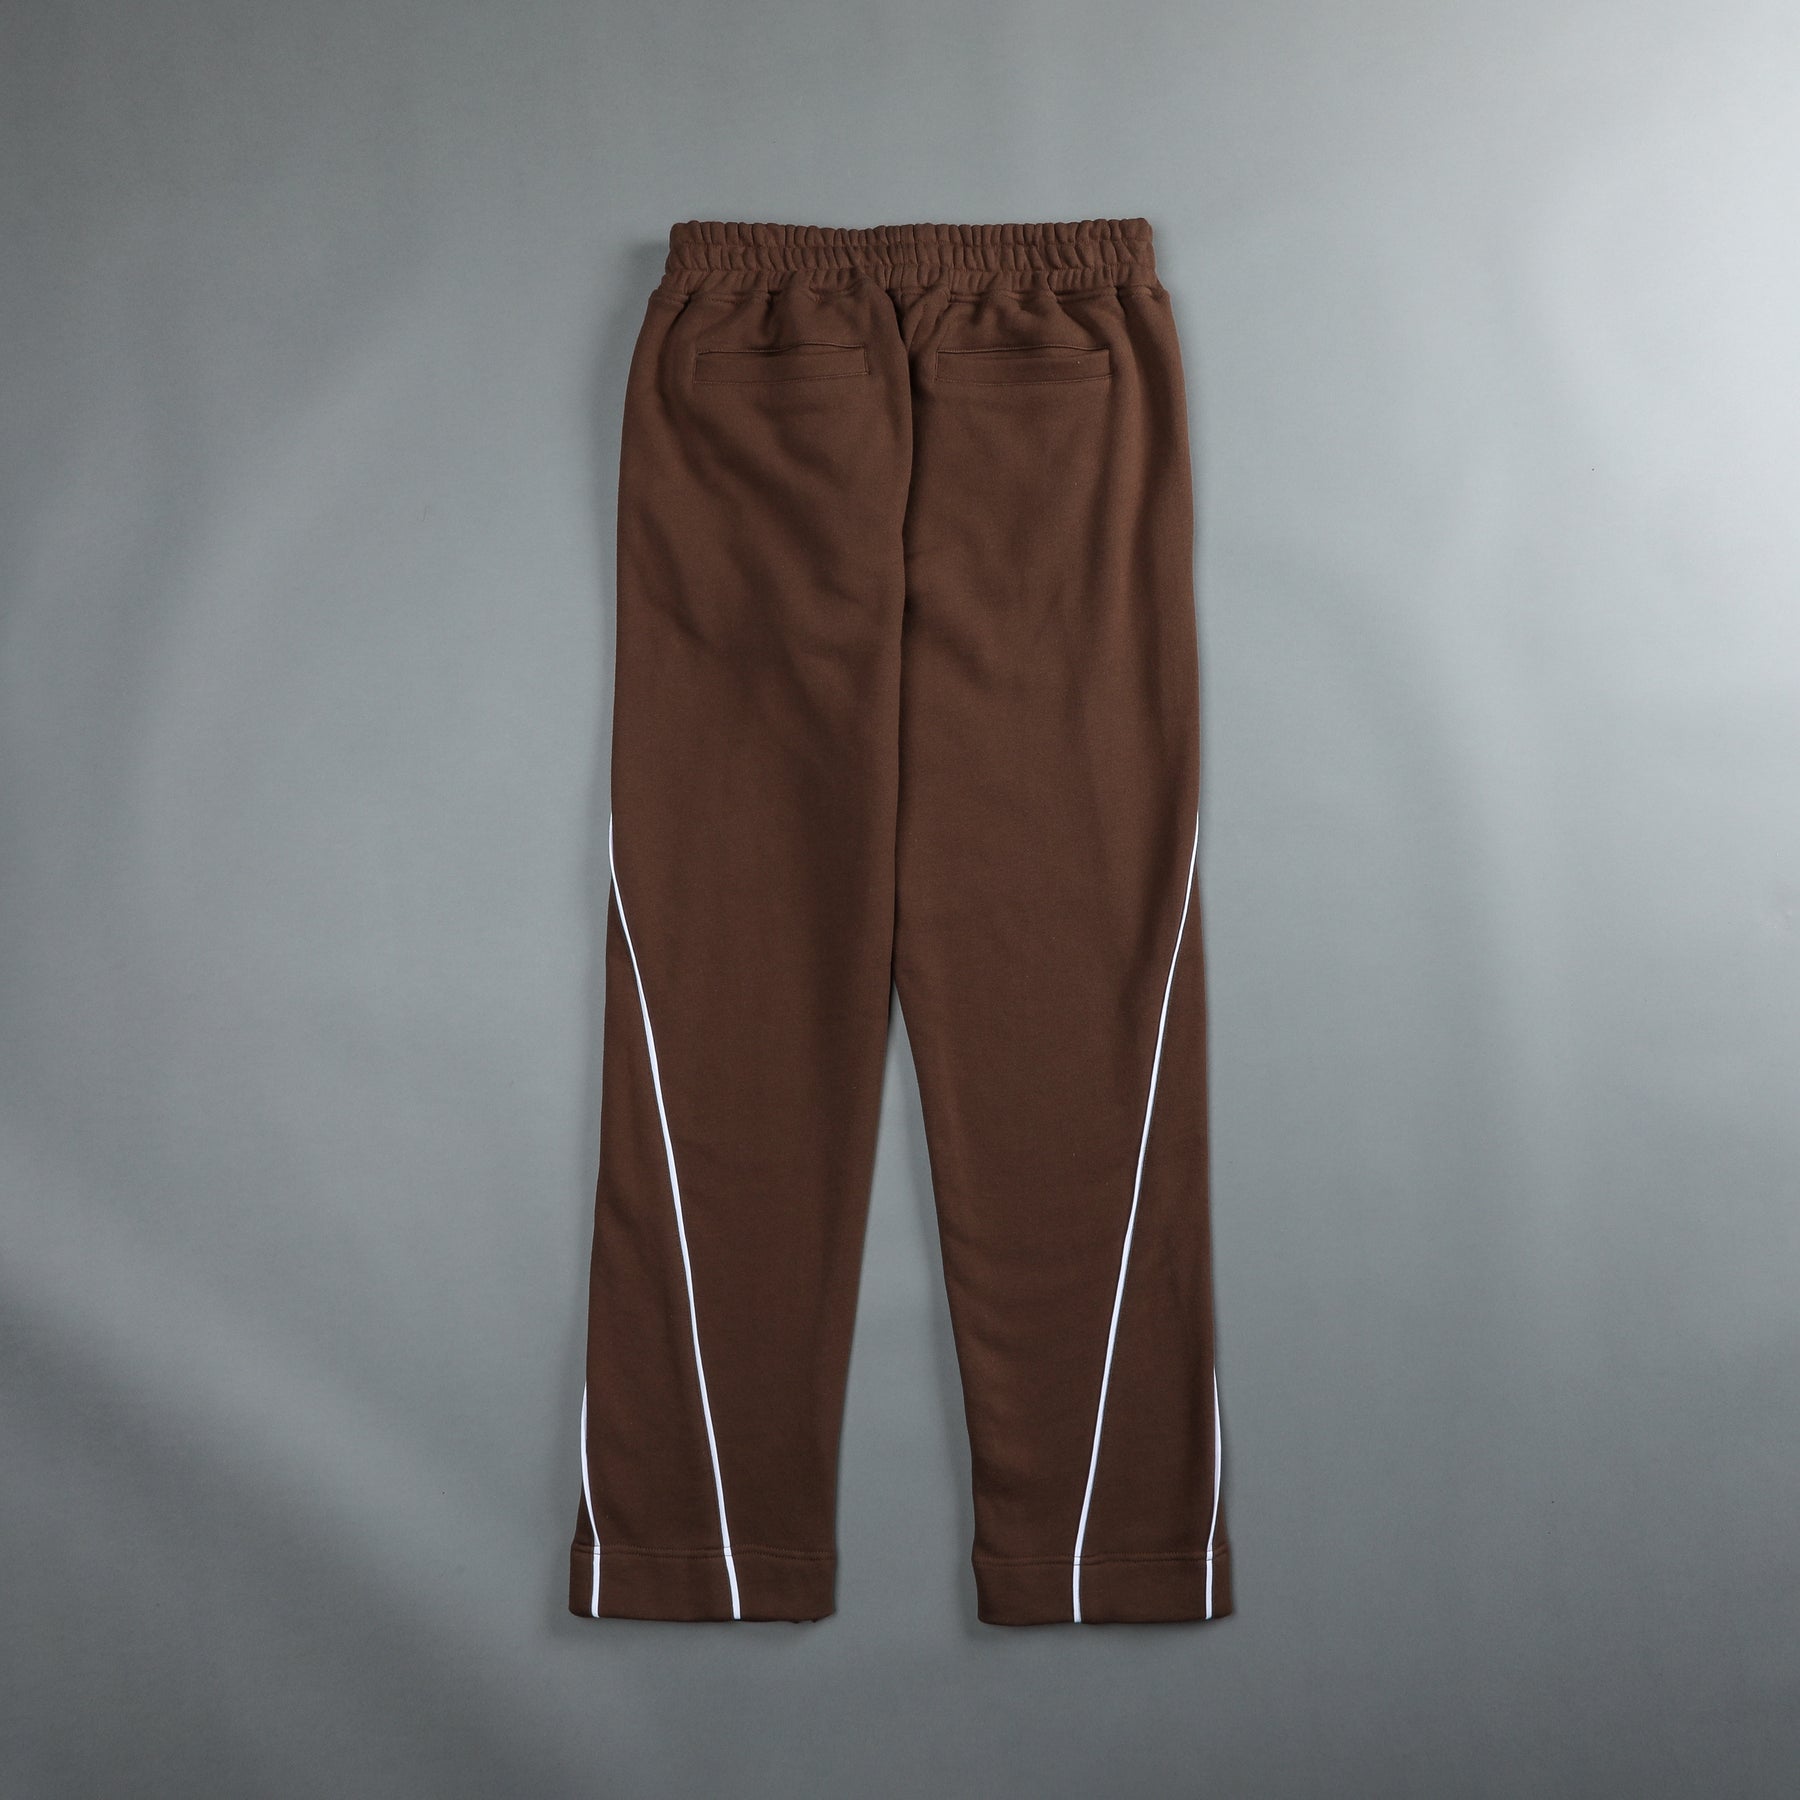 Dual Fleece Darby Track Pants in Rosemary – DarcSport